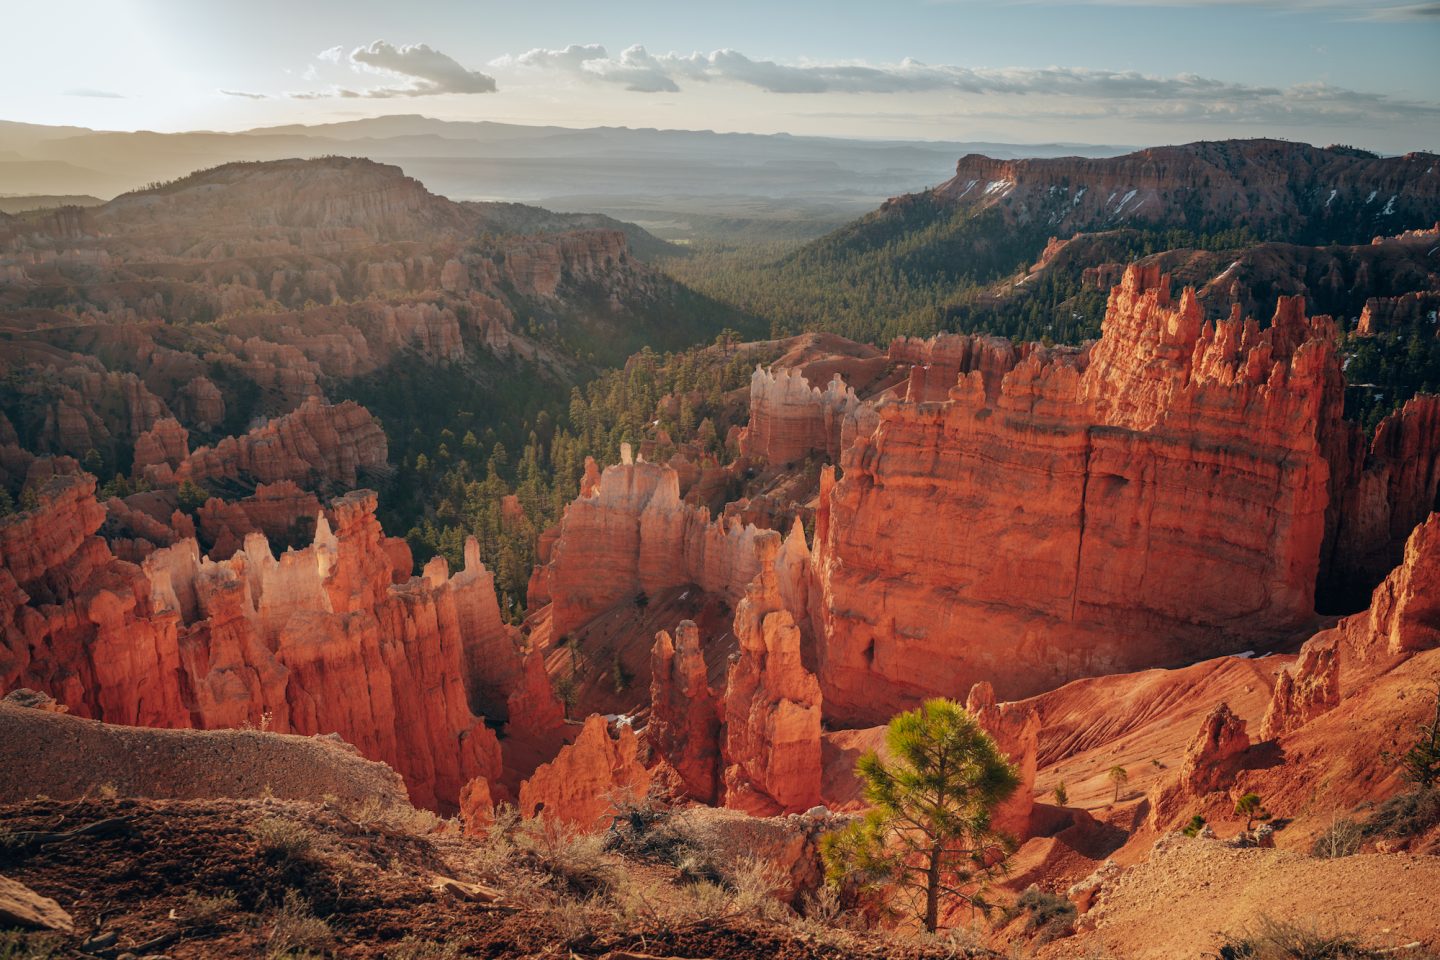 Thor's Hammer - Bryce Canyon National Park